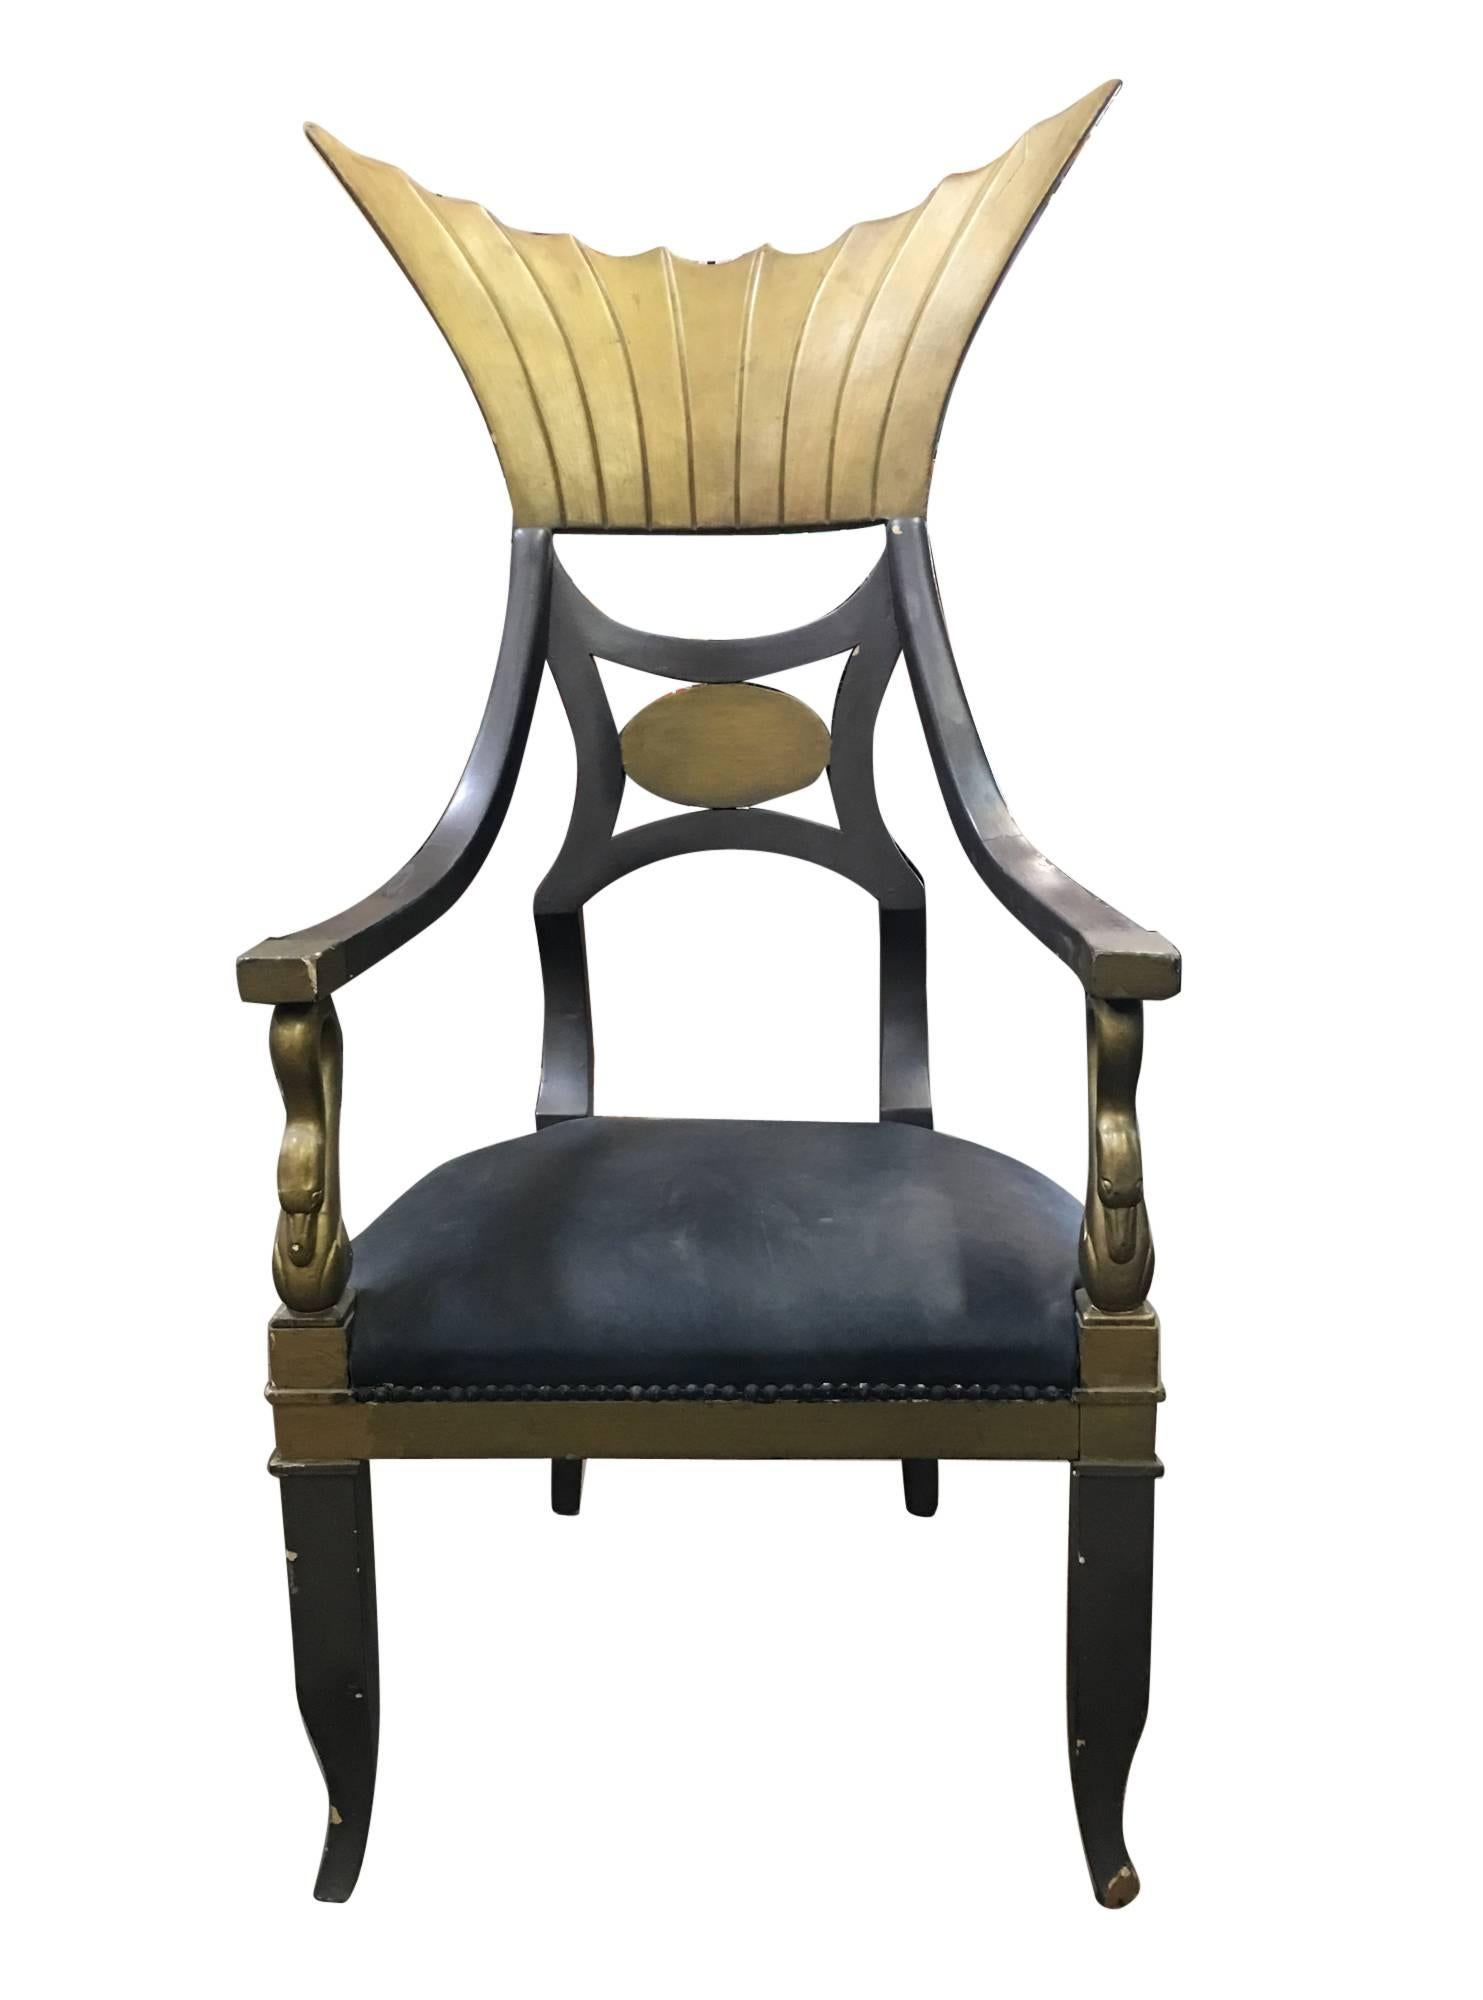 Original Egyptian throne chair used in the classic 1934 Claudette Colbert Film Cleopatra, from Paramount Studios. The dramatic chair, in which the star sat, can be seen in the scenes of Cleopatra's bed chamber. The chair embodies the style and